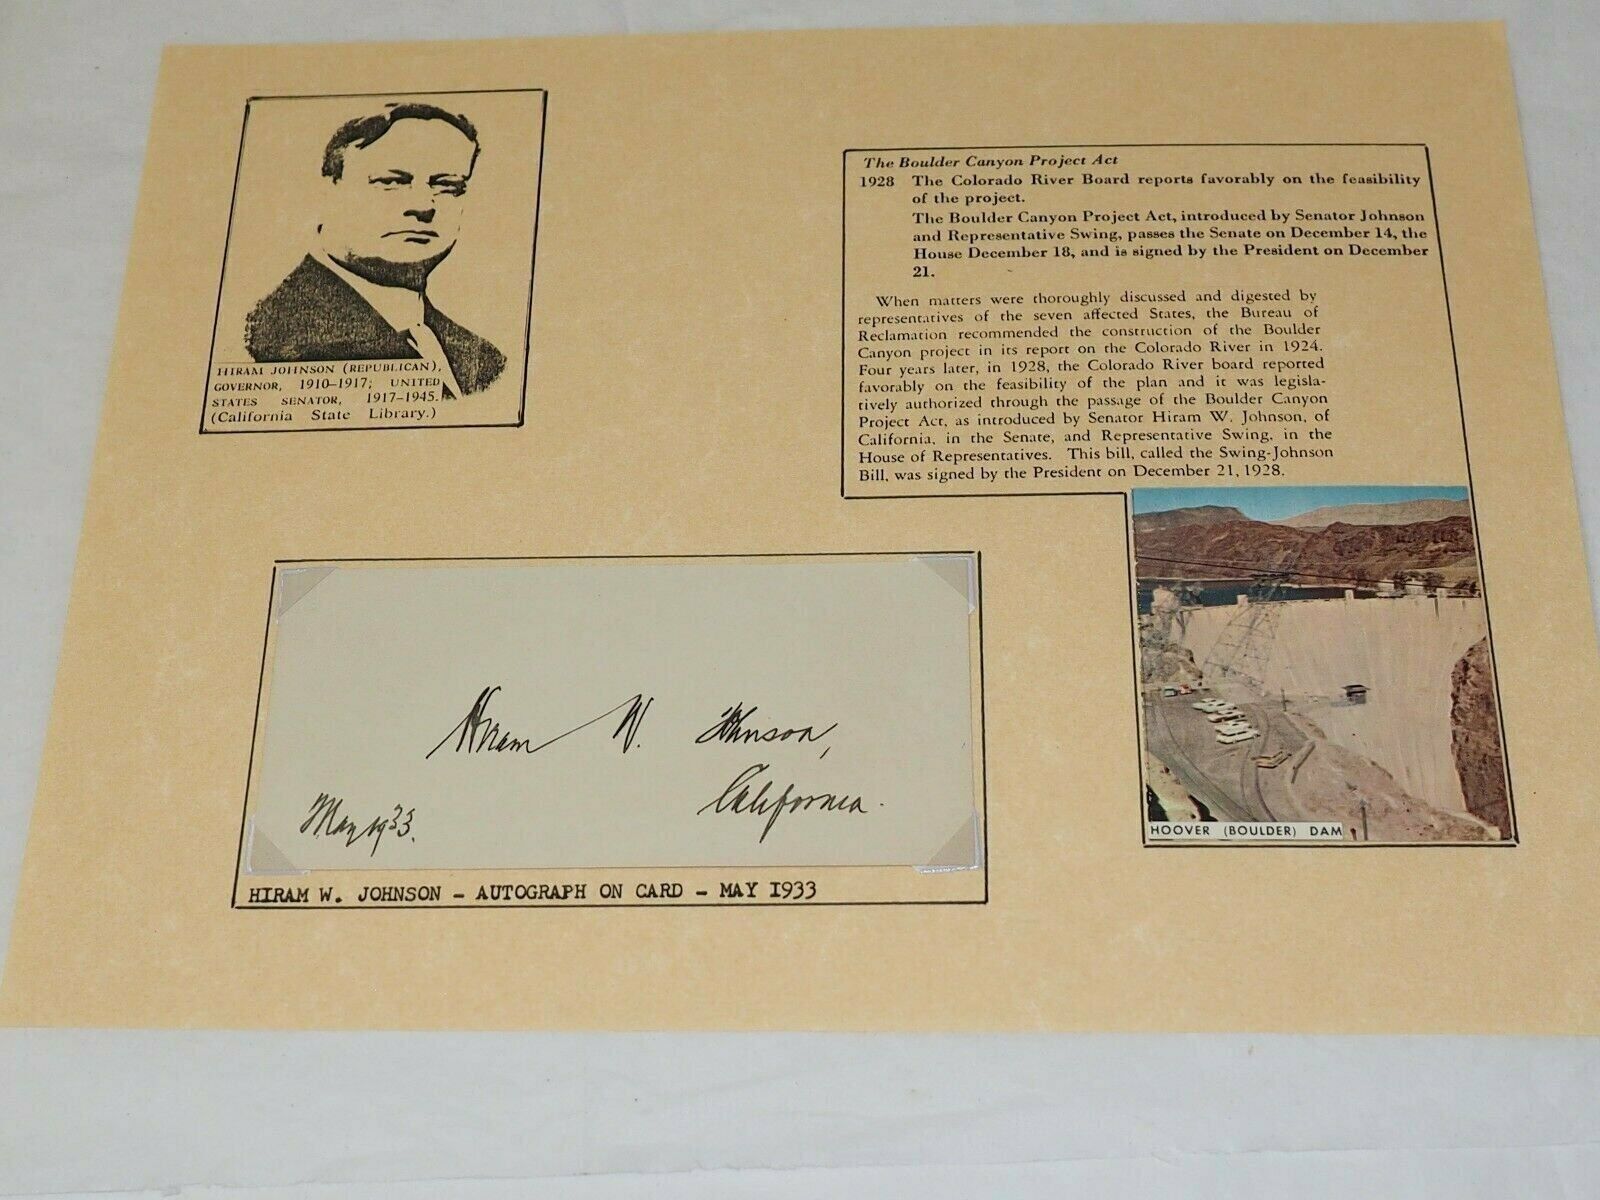 Senator HIRAM W.JOHNSON AUTOGRAPH and Story of Hoover Dam and the Boulder canyon